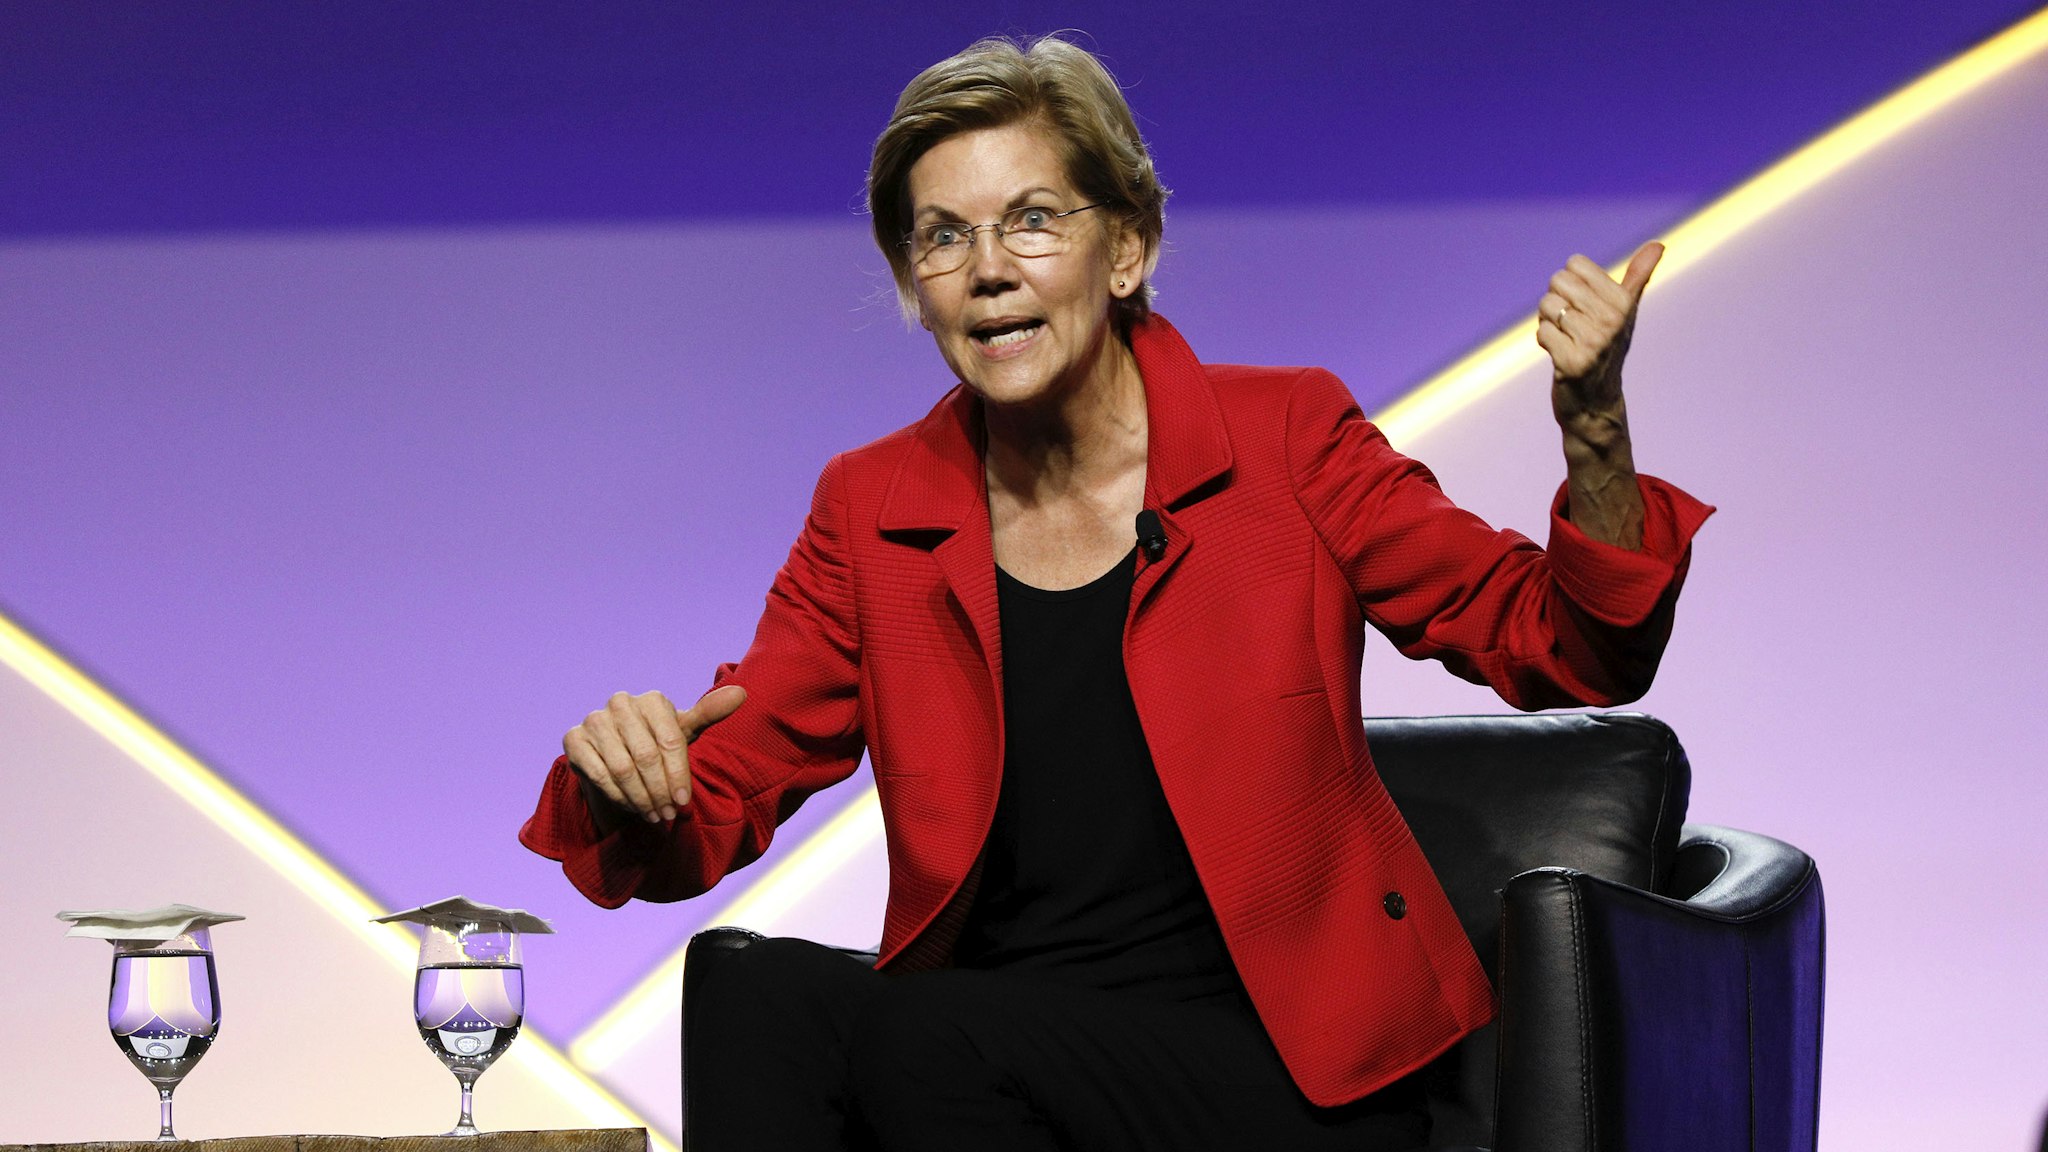 DETROIT, MI - JULY 24: Democratic presidential candidate U.S. Sen. Elizabeth Warren (D-MA) participates in a Presidential Candidates Forum at the NAACP 110th National Convention on July 24, 2019 in Detroit, Michigan. The theme of this years Convention is, When We Fight, We Win.